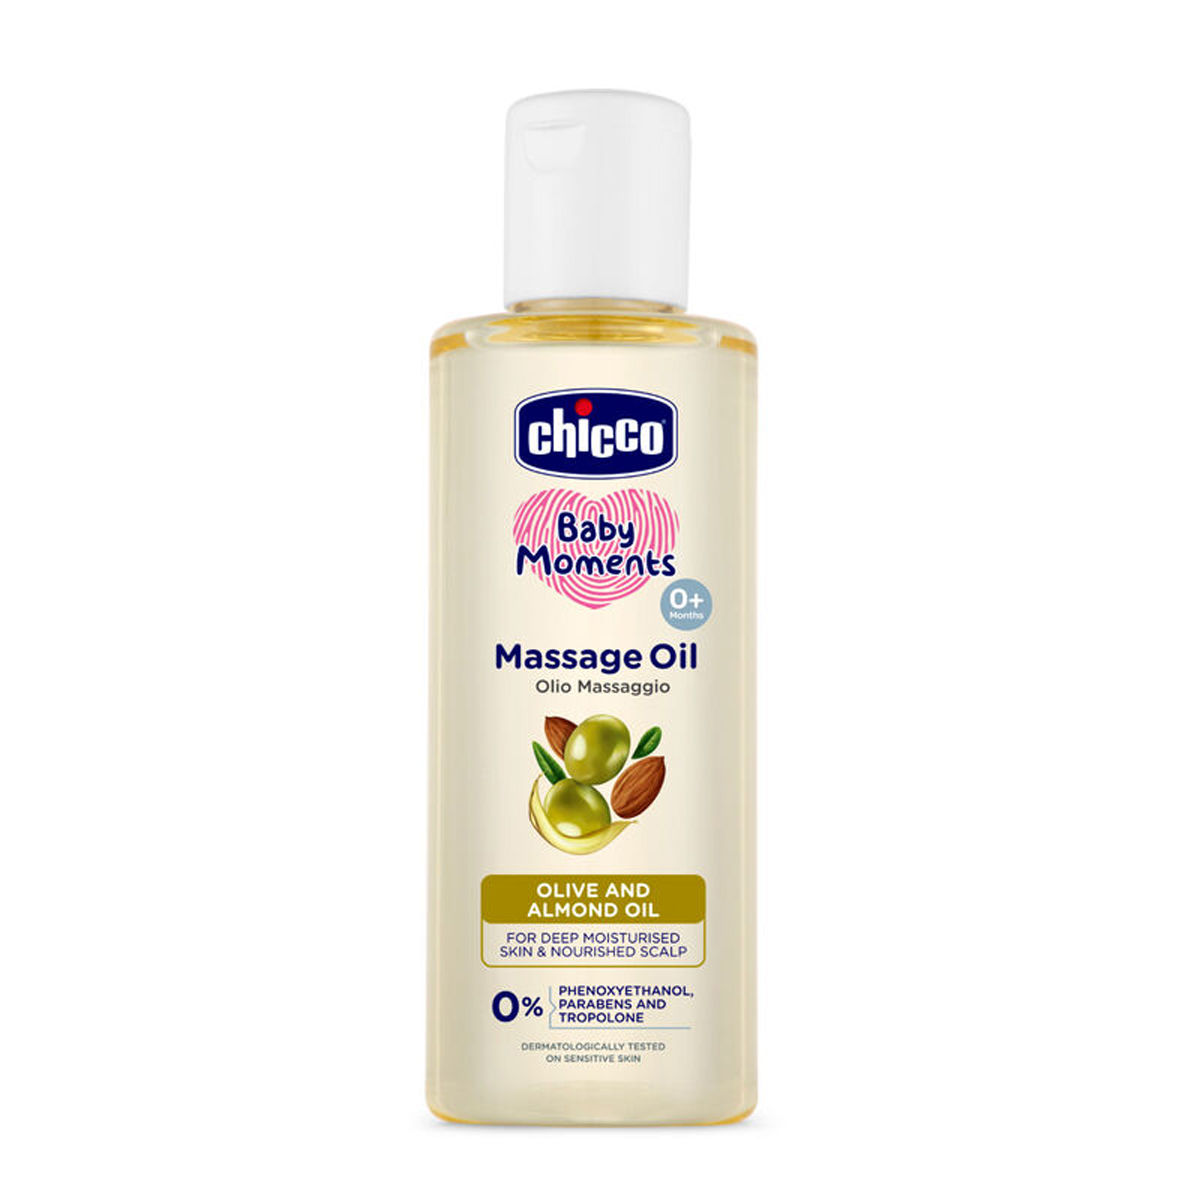 Buy Chicco Baby Moments Massage Oil, 200 ml Online